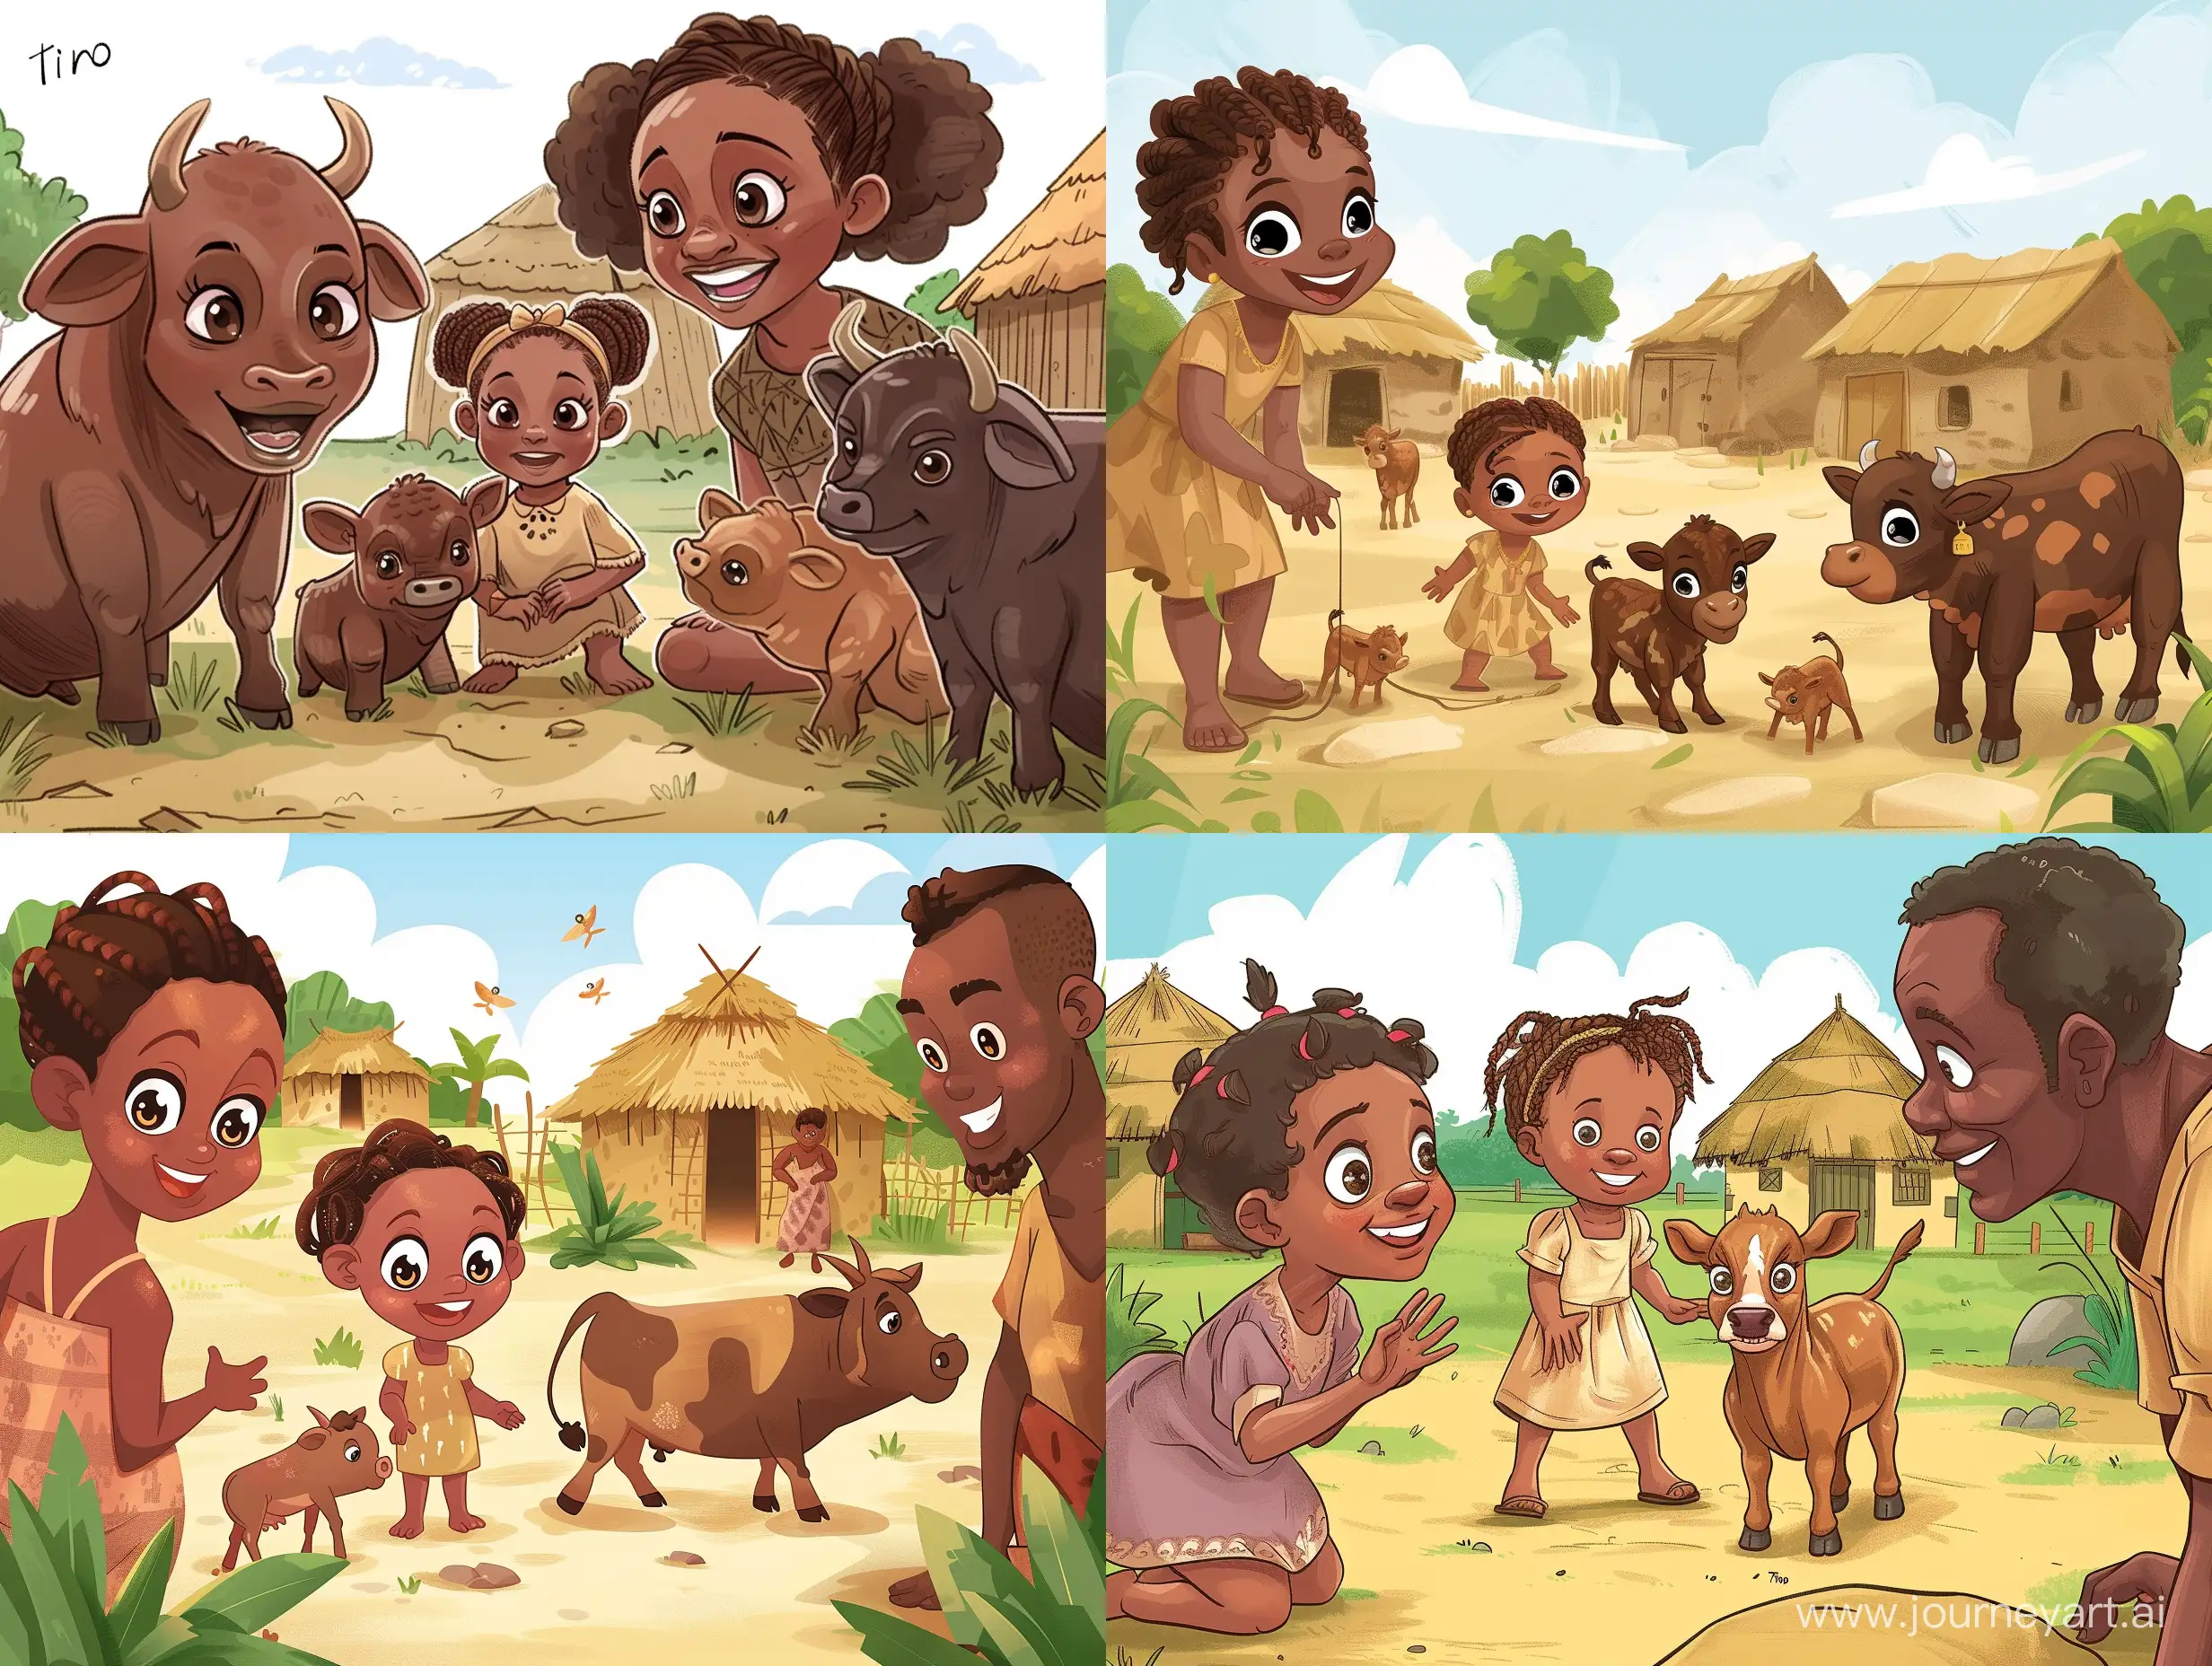 Adorable-African-Toddler-Playing-with-Cows-in-Village-Setting